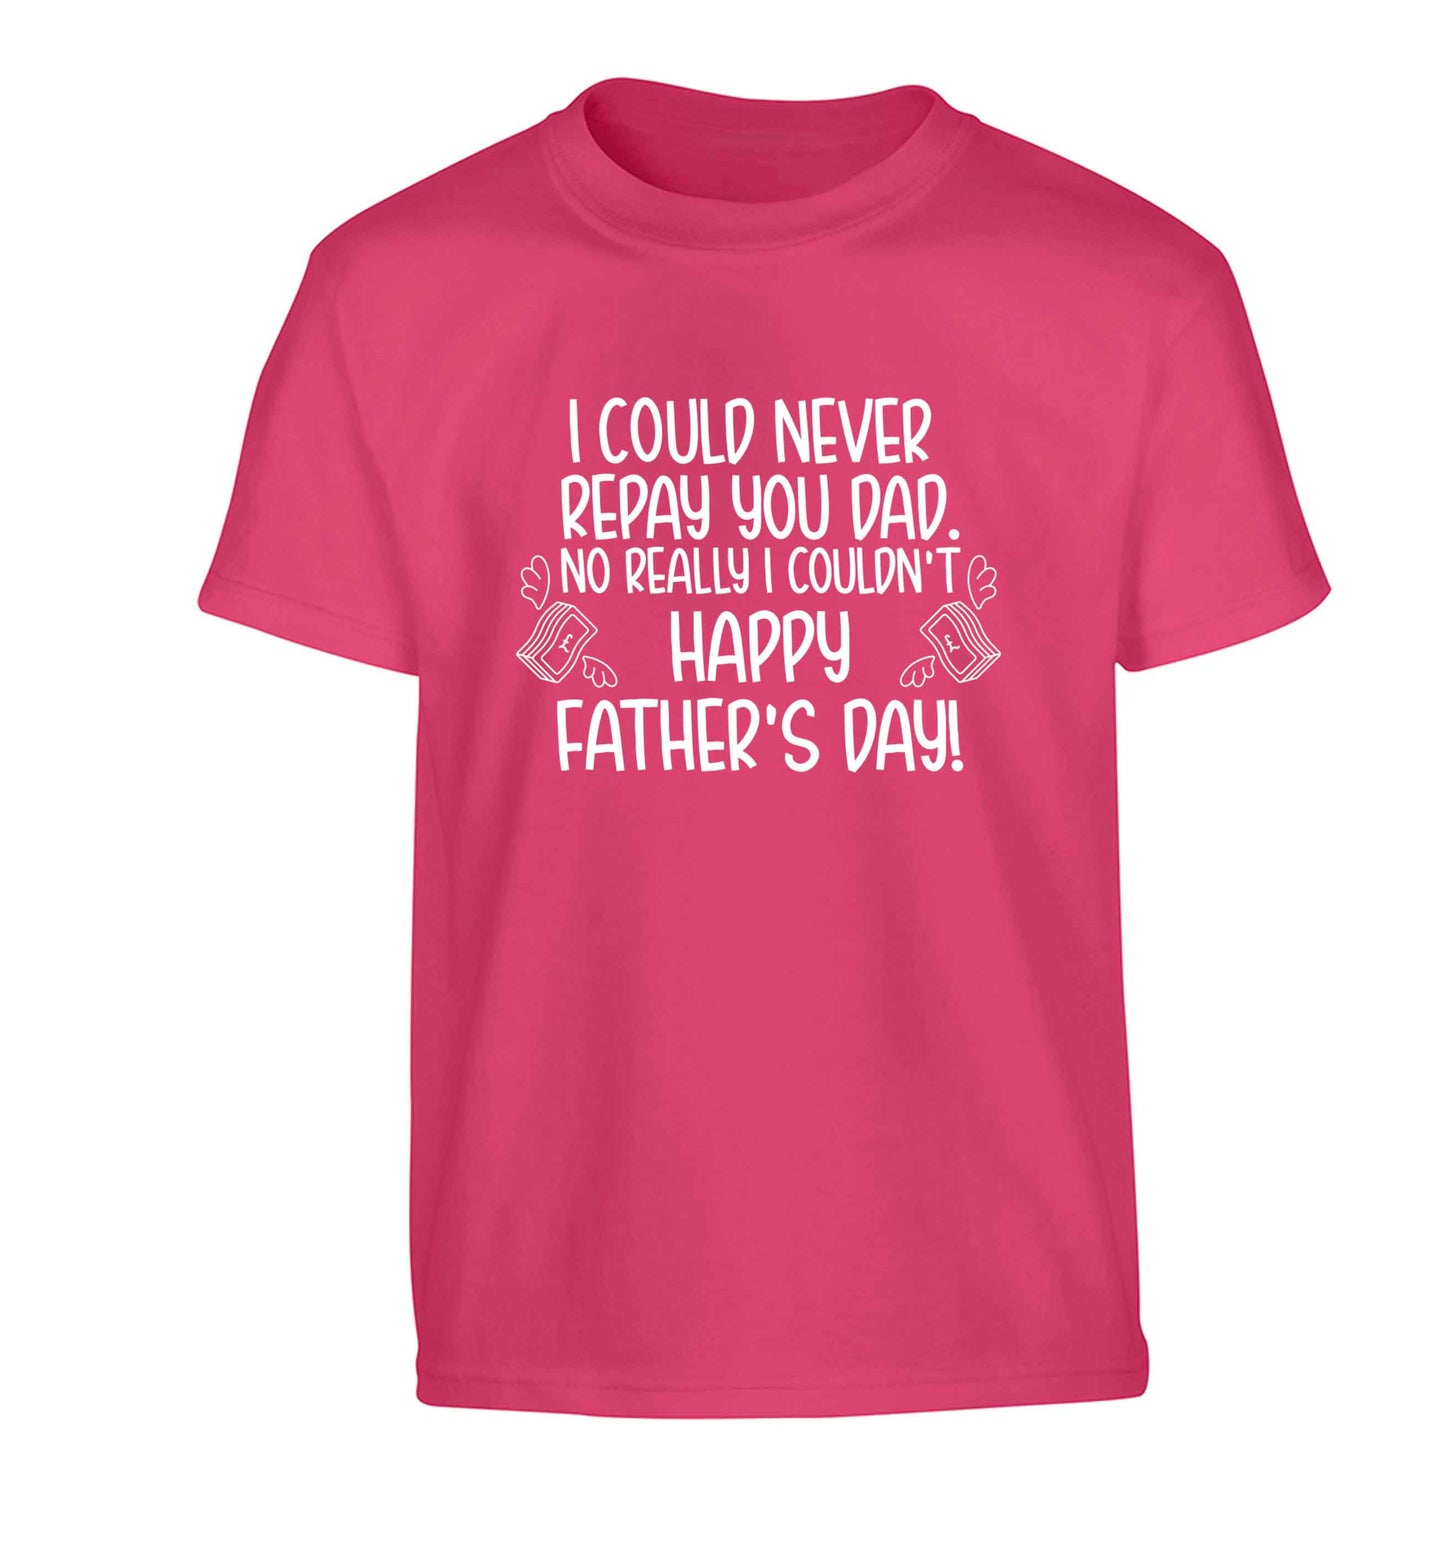 I could never repay you dad. No I really couldn't happy Father's day! Children's pink Tshirt 12-13 Years